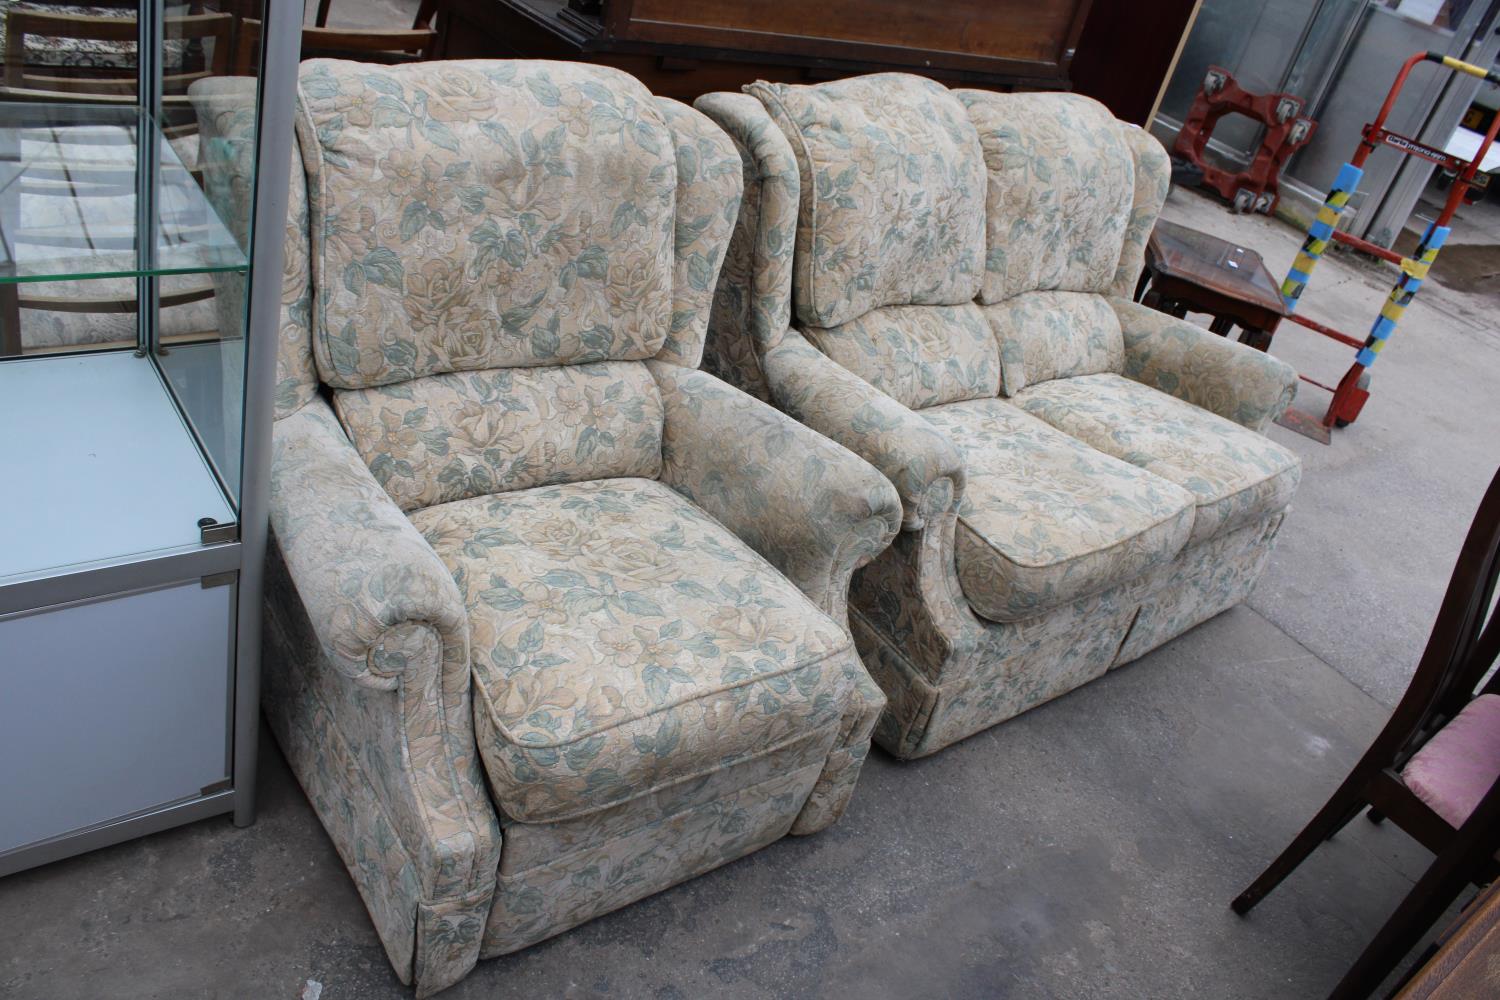 A MODERN G.PLAN TWO SEATER SETTEE AND A MATCHING RECLINER - Image 2 of 6